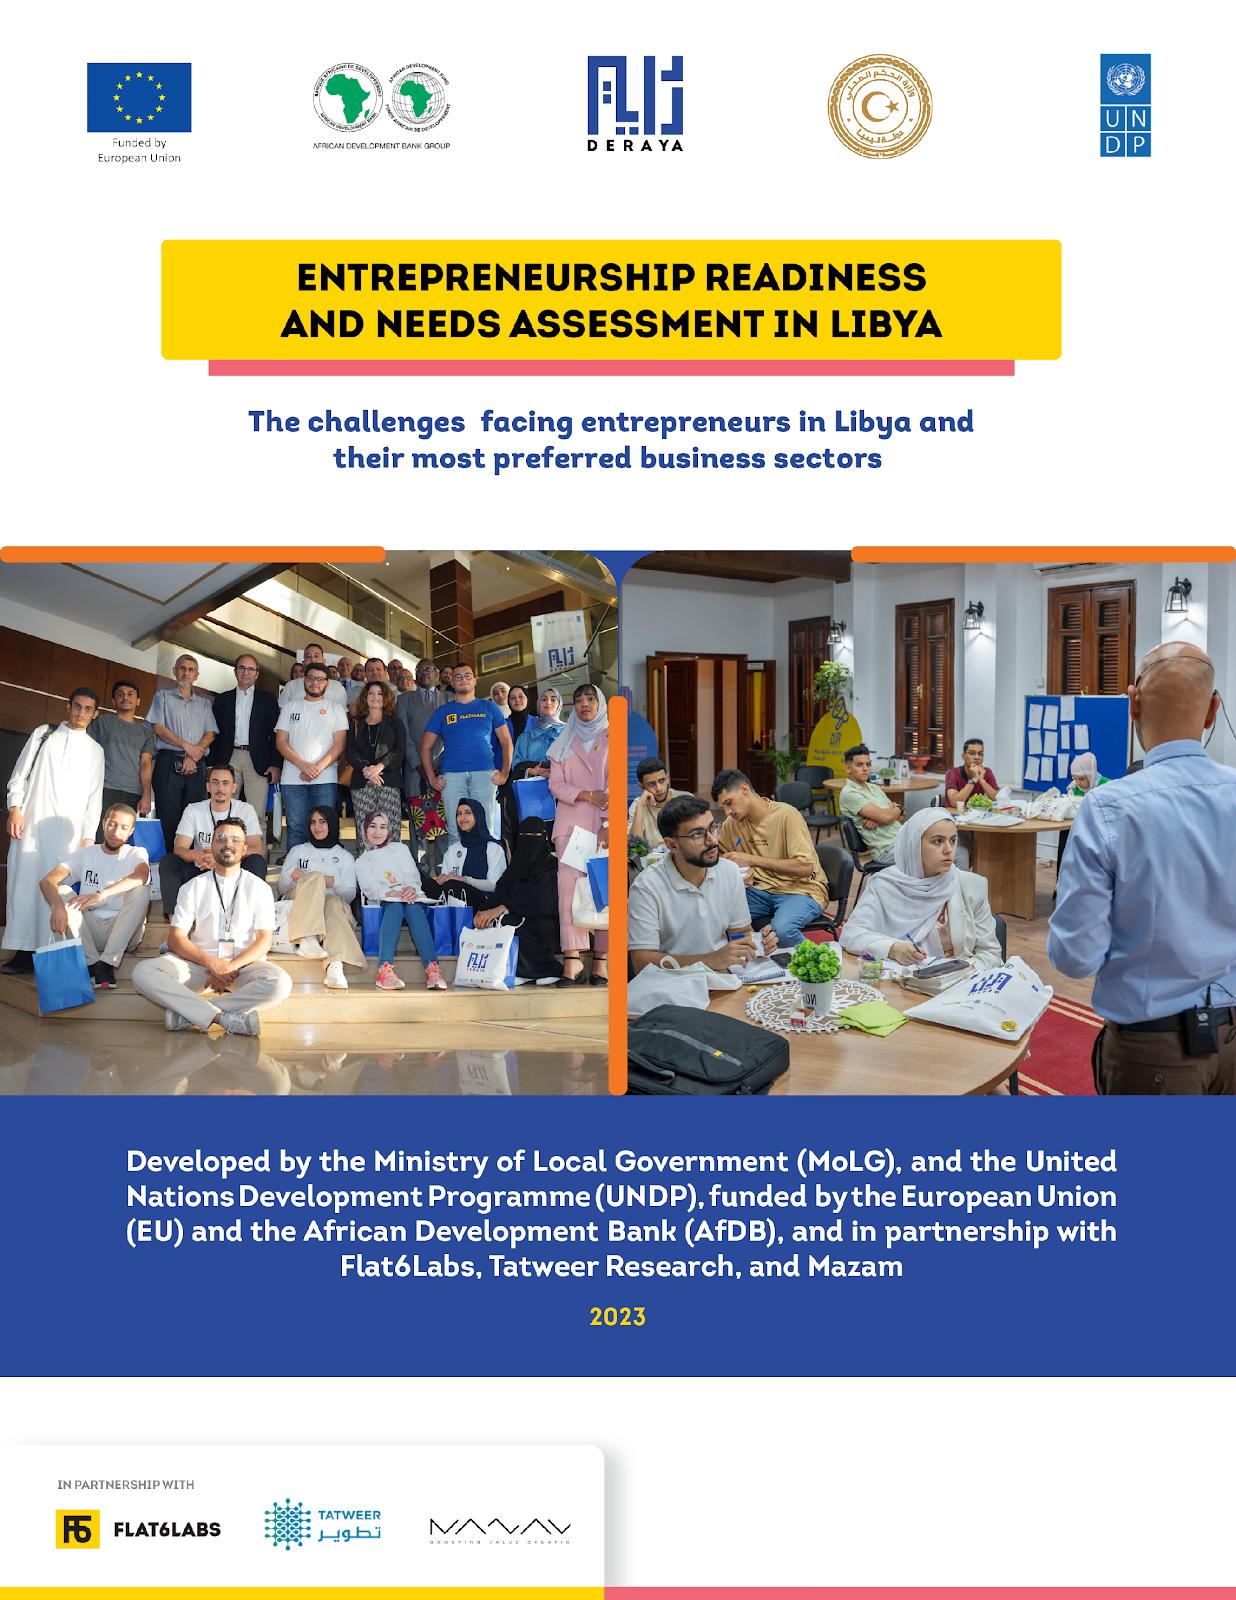 Entrepreneurship Readiness and Needs Assessment in Libya: The challenges facing entrepreneurs in Libya and their most preferred business sectors